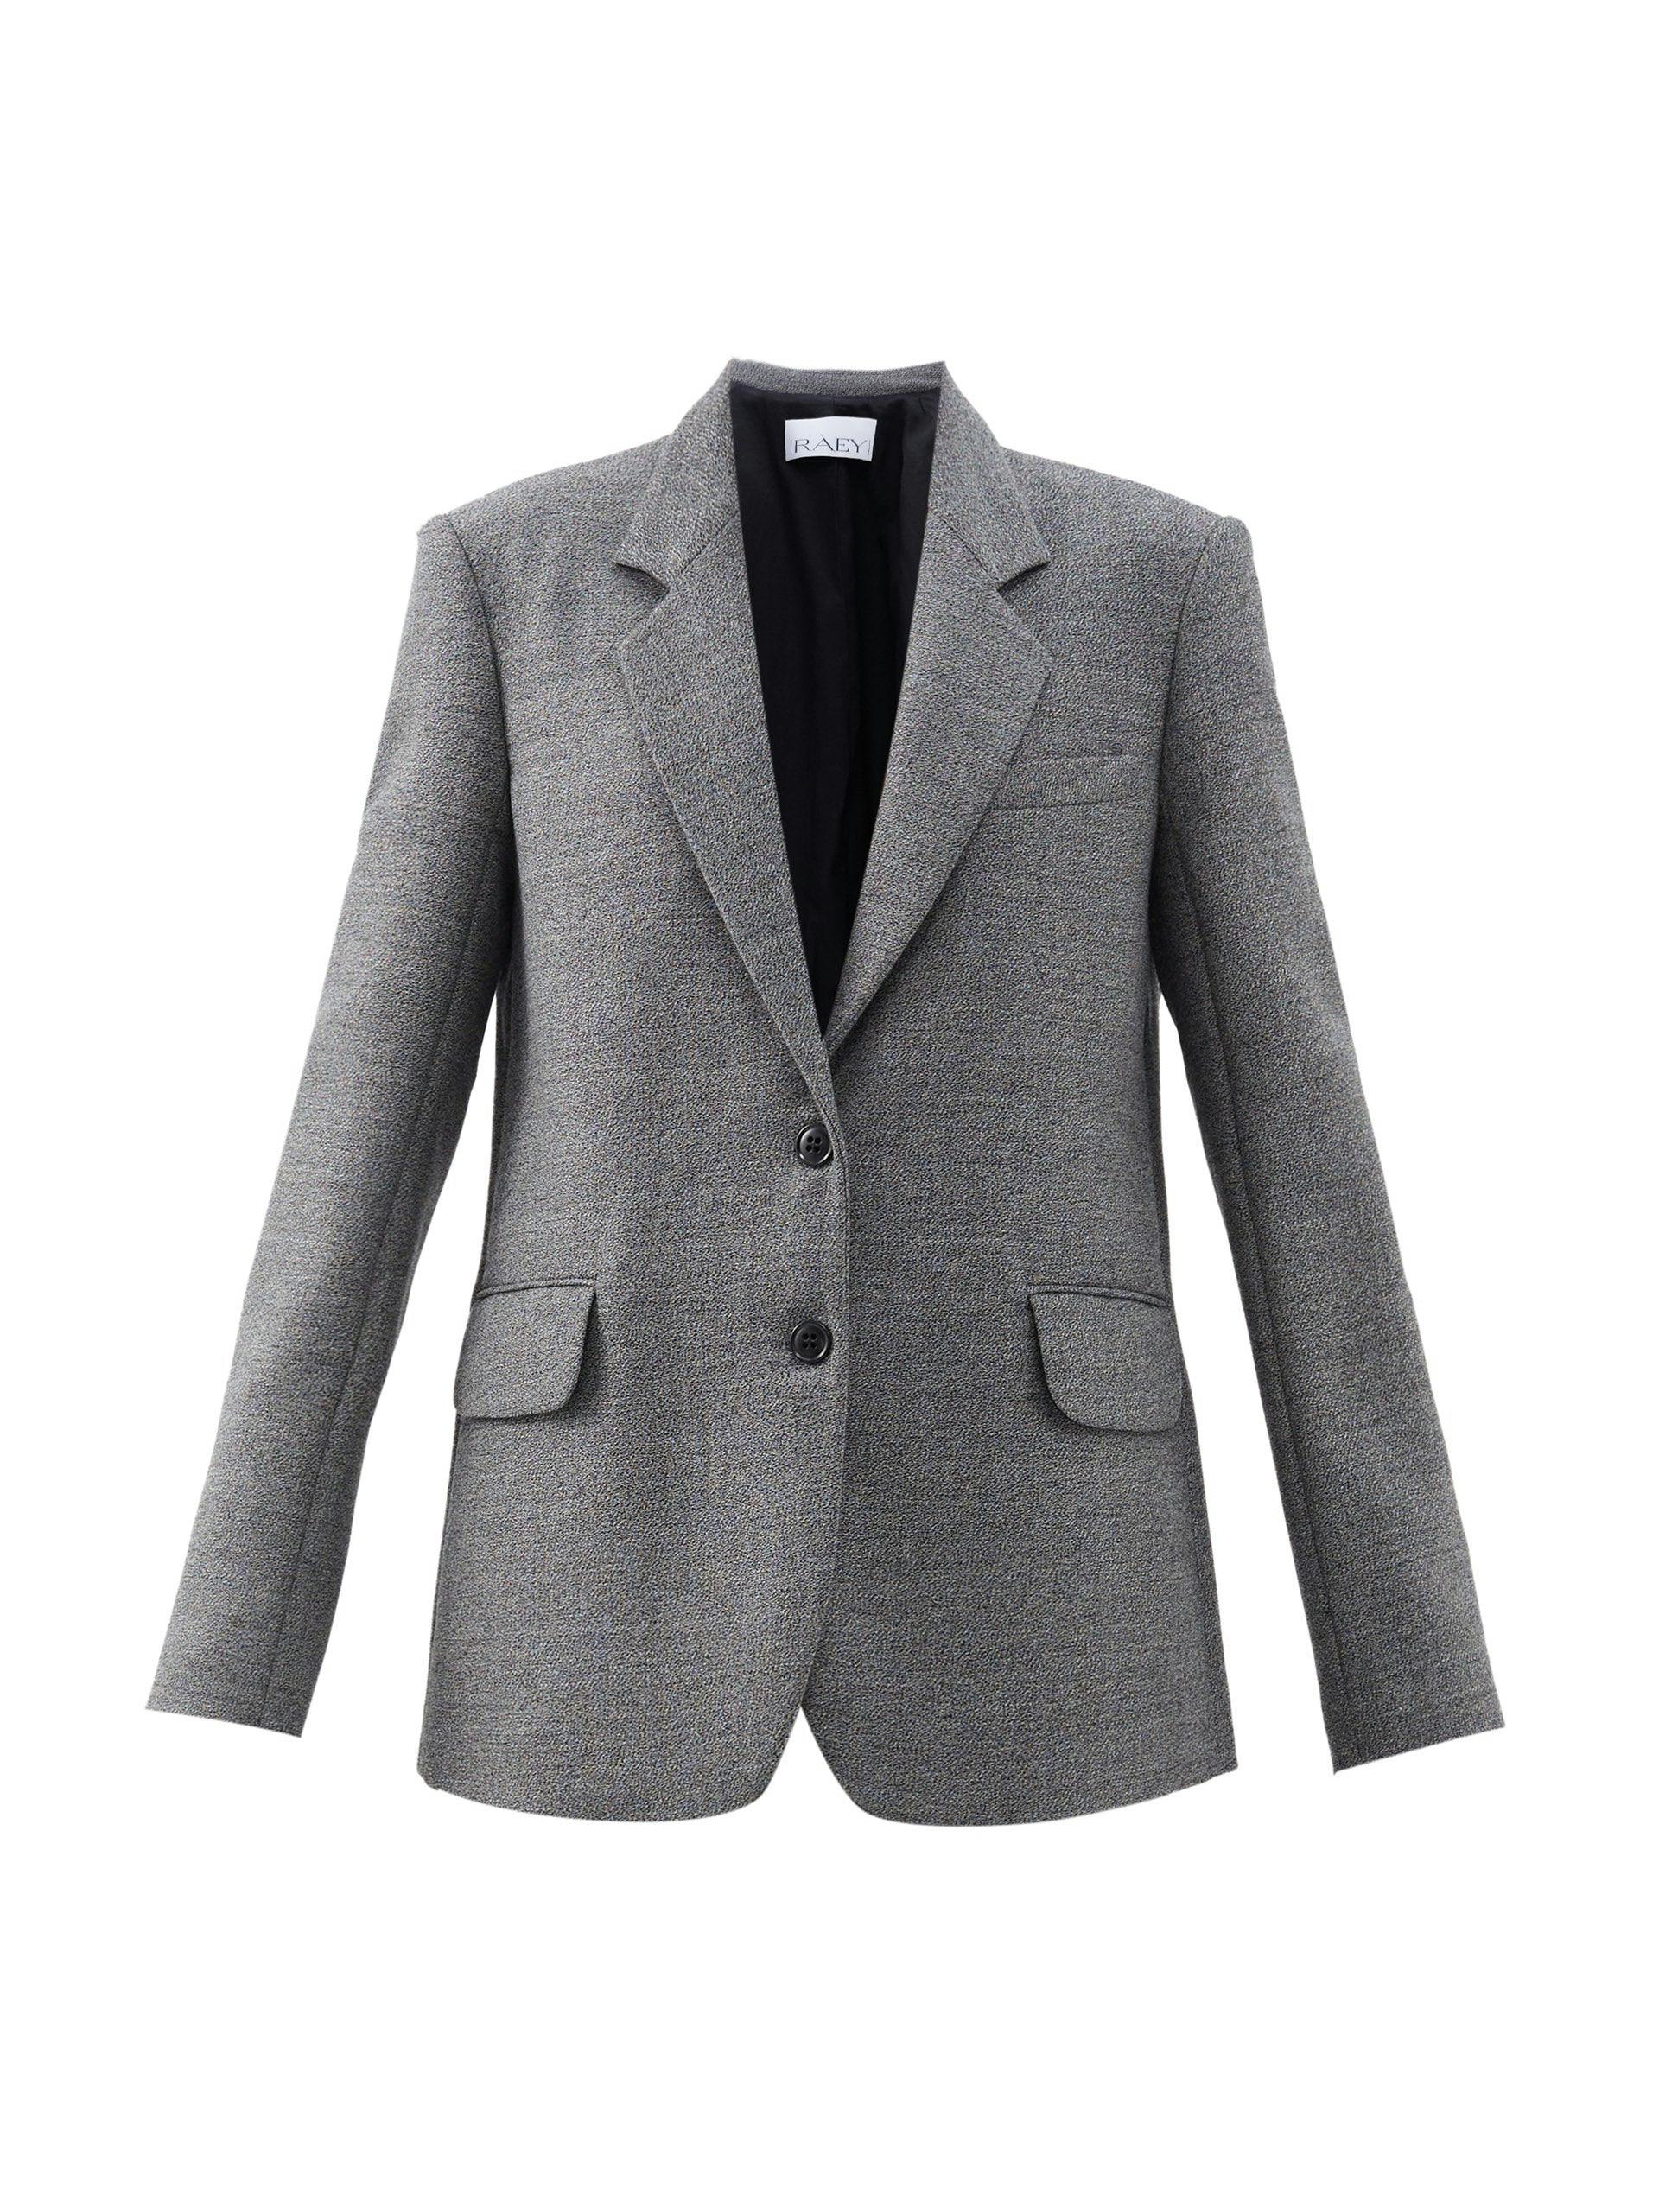 Wool tailored suit jacket